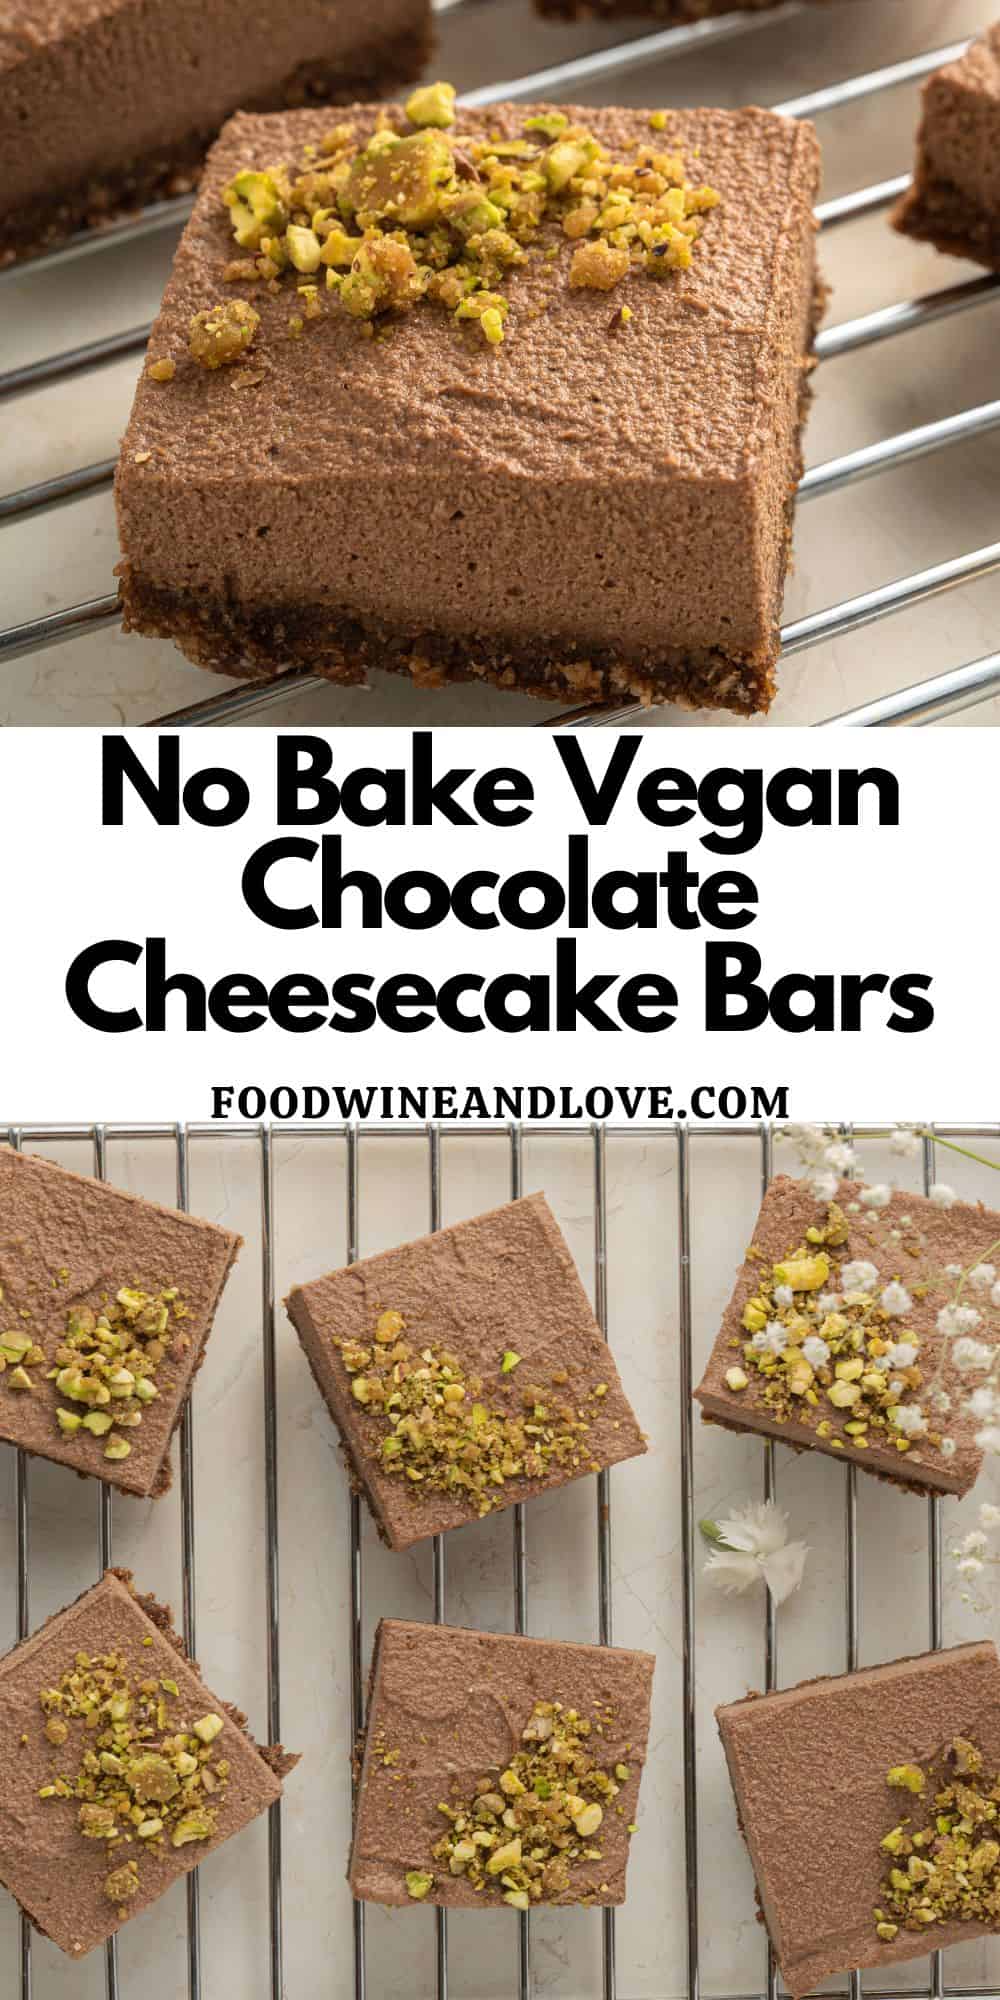 No Bake Vegan Chocolate Cheesecake Bars, a delicious dessert recipe featuring a lush chocolate cheesecake on top of a moist and sweet crust.